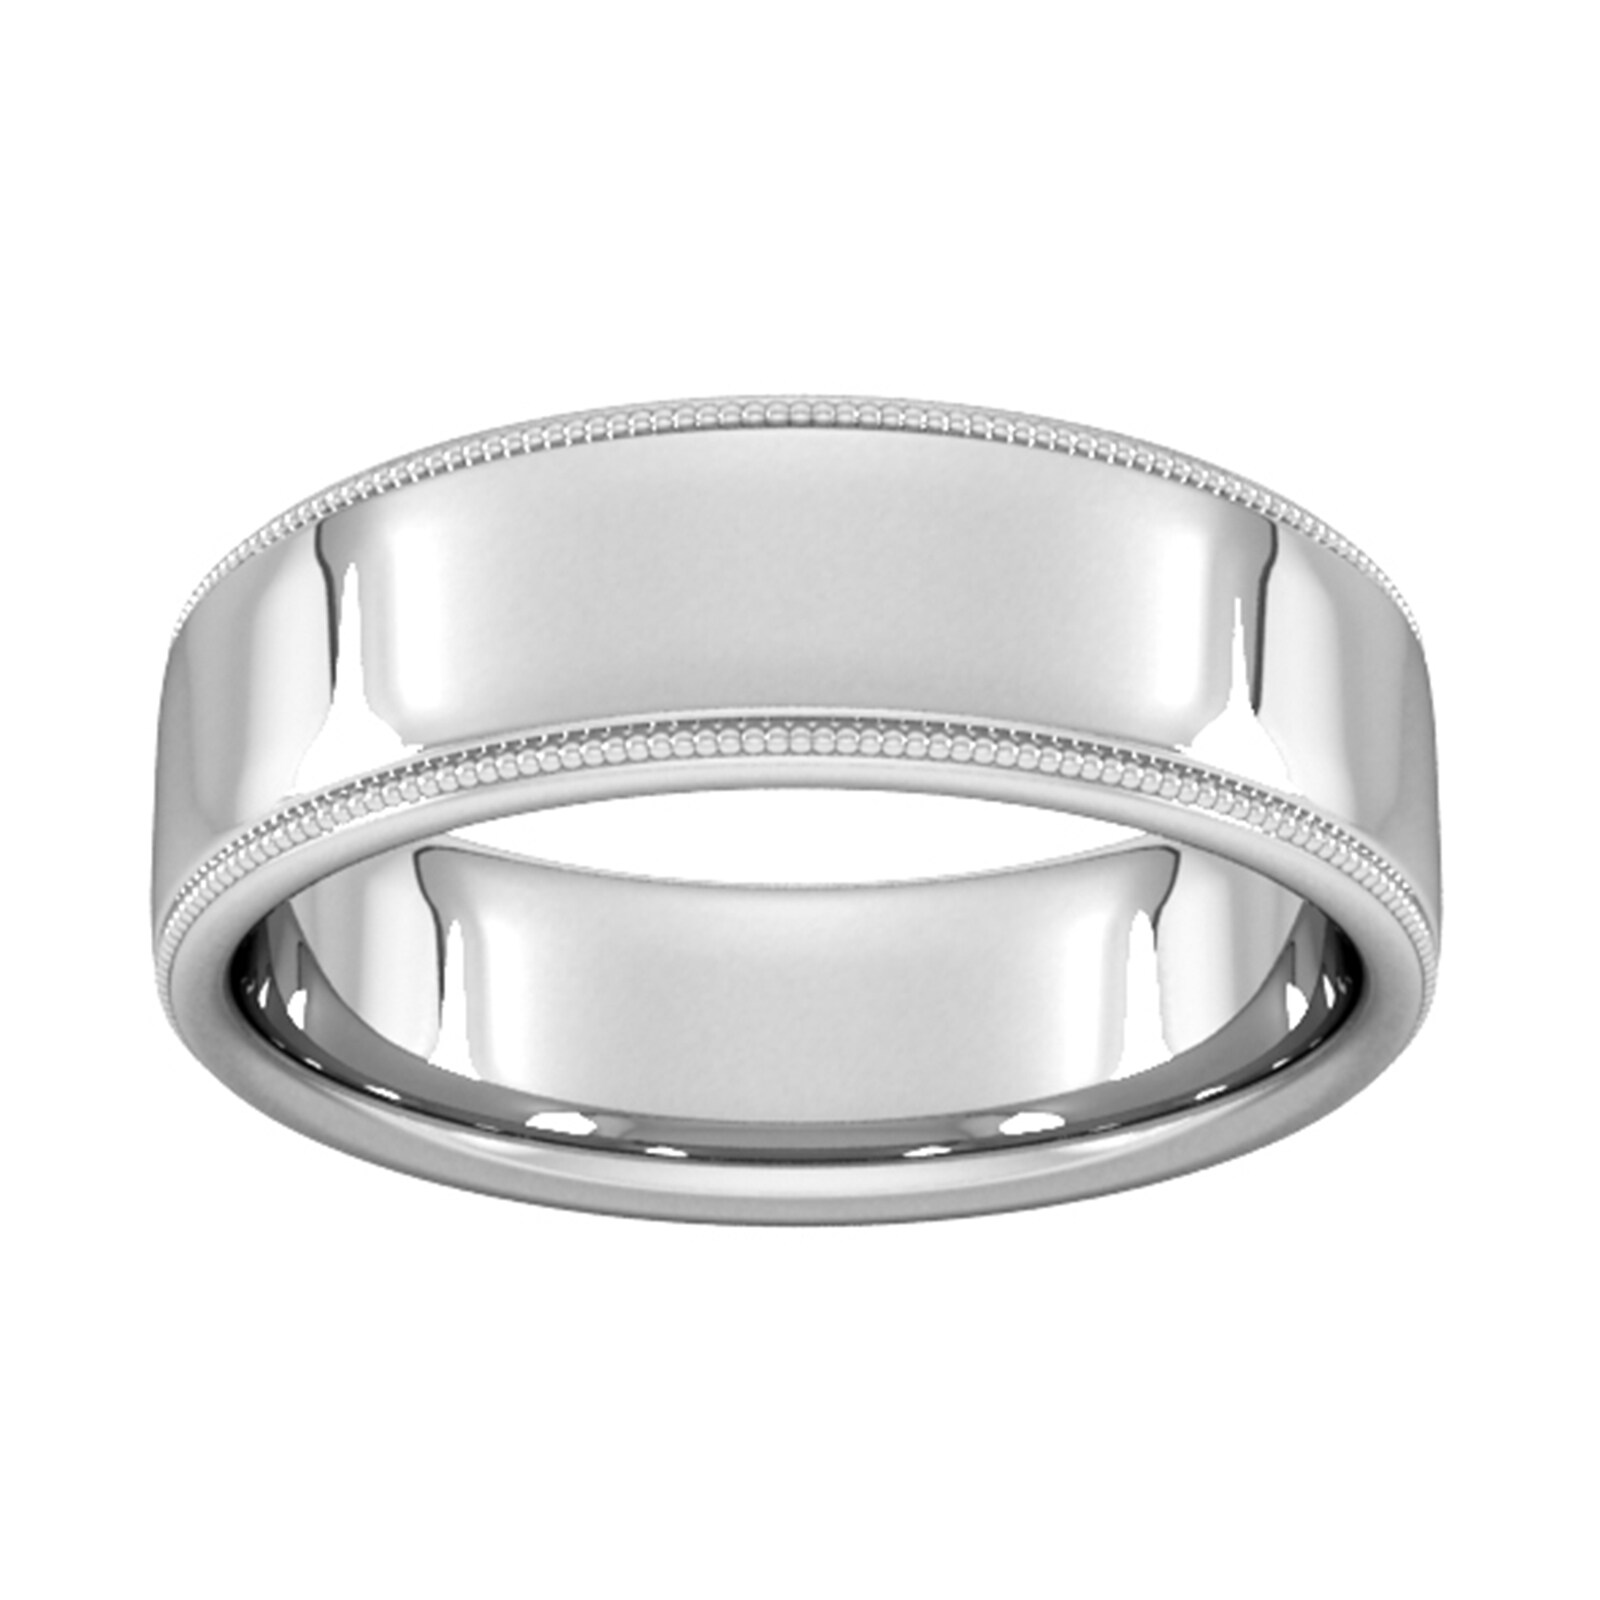 7mm Traditional Court Standard Milgrain Edge Wedding Ring In 9 Carat White Gold - Ring Size L